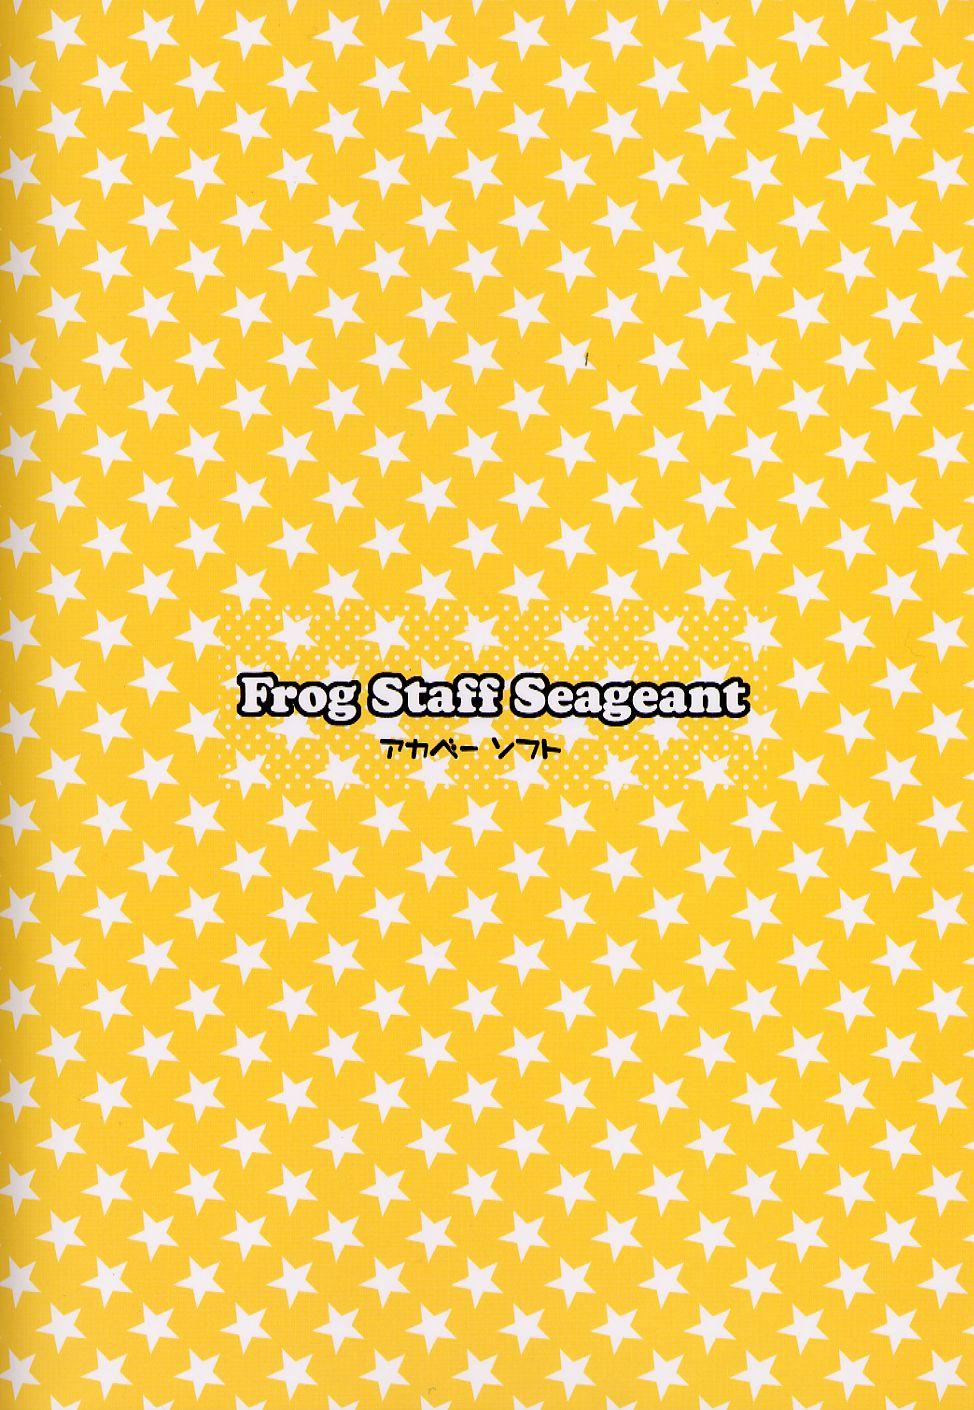 Frog Staff Seageant 25